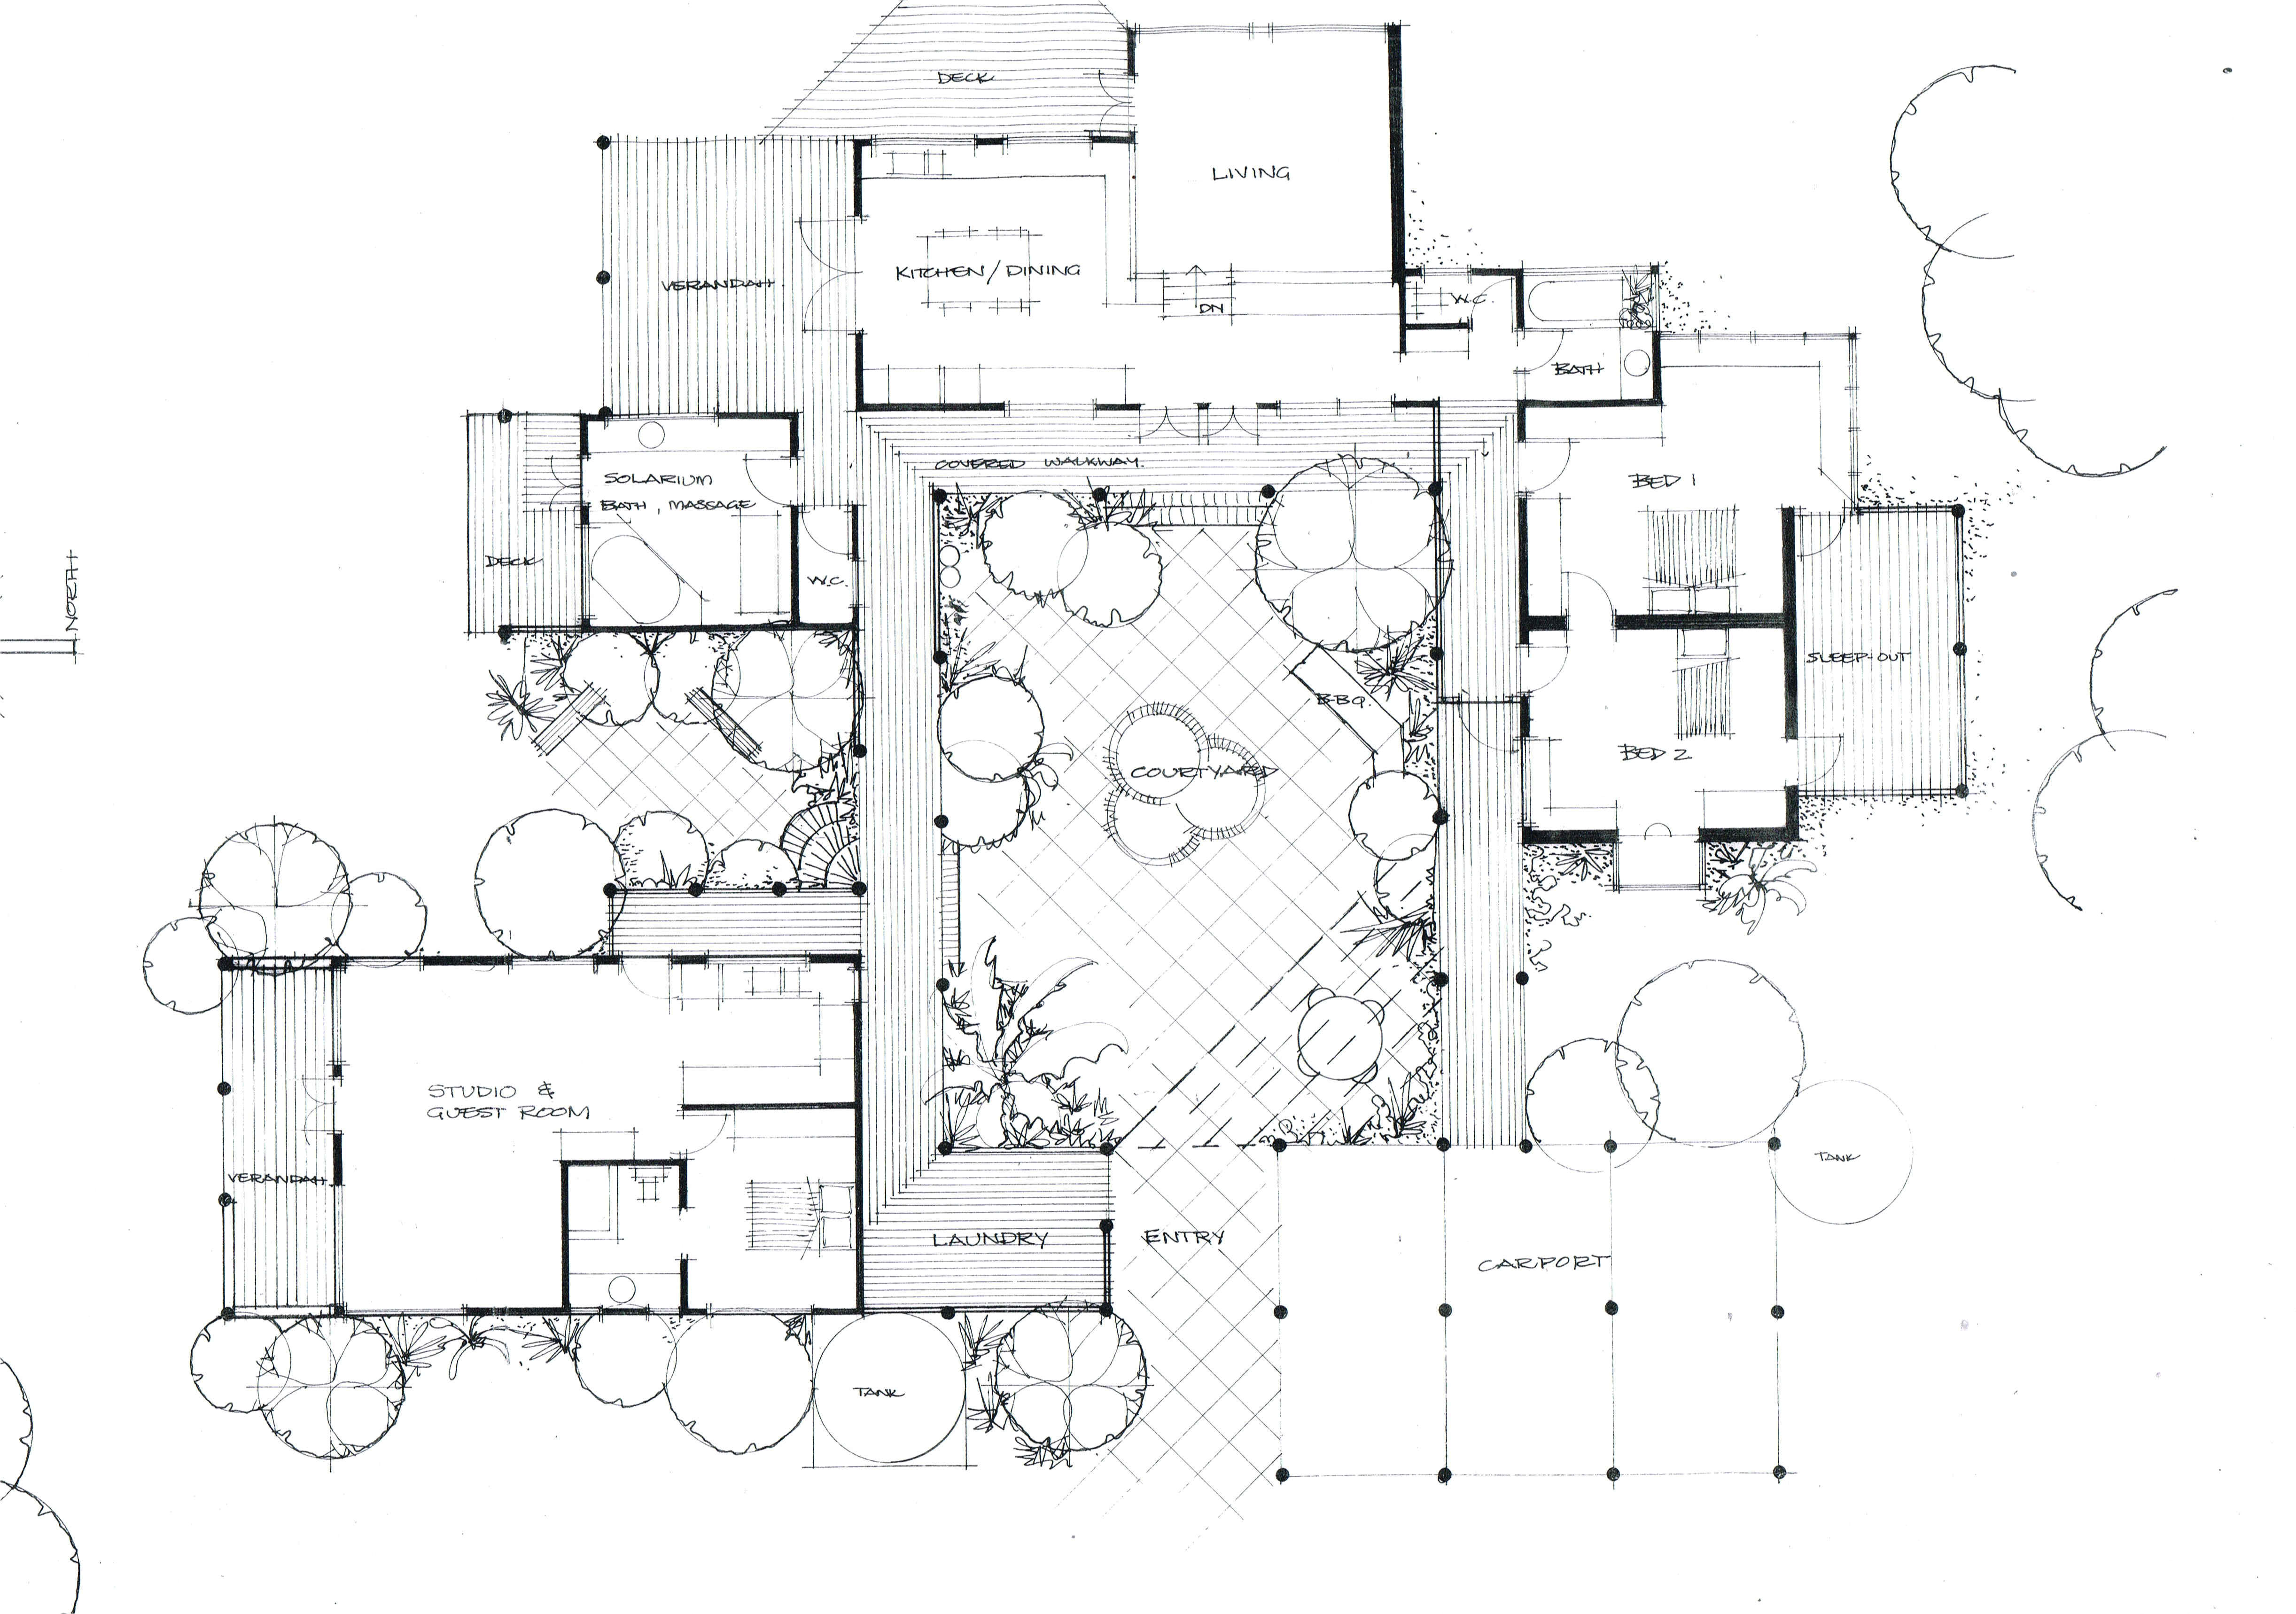 Courtyard Homes Plans the Courtyard House Heather Fraser Building Designer